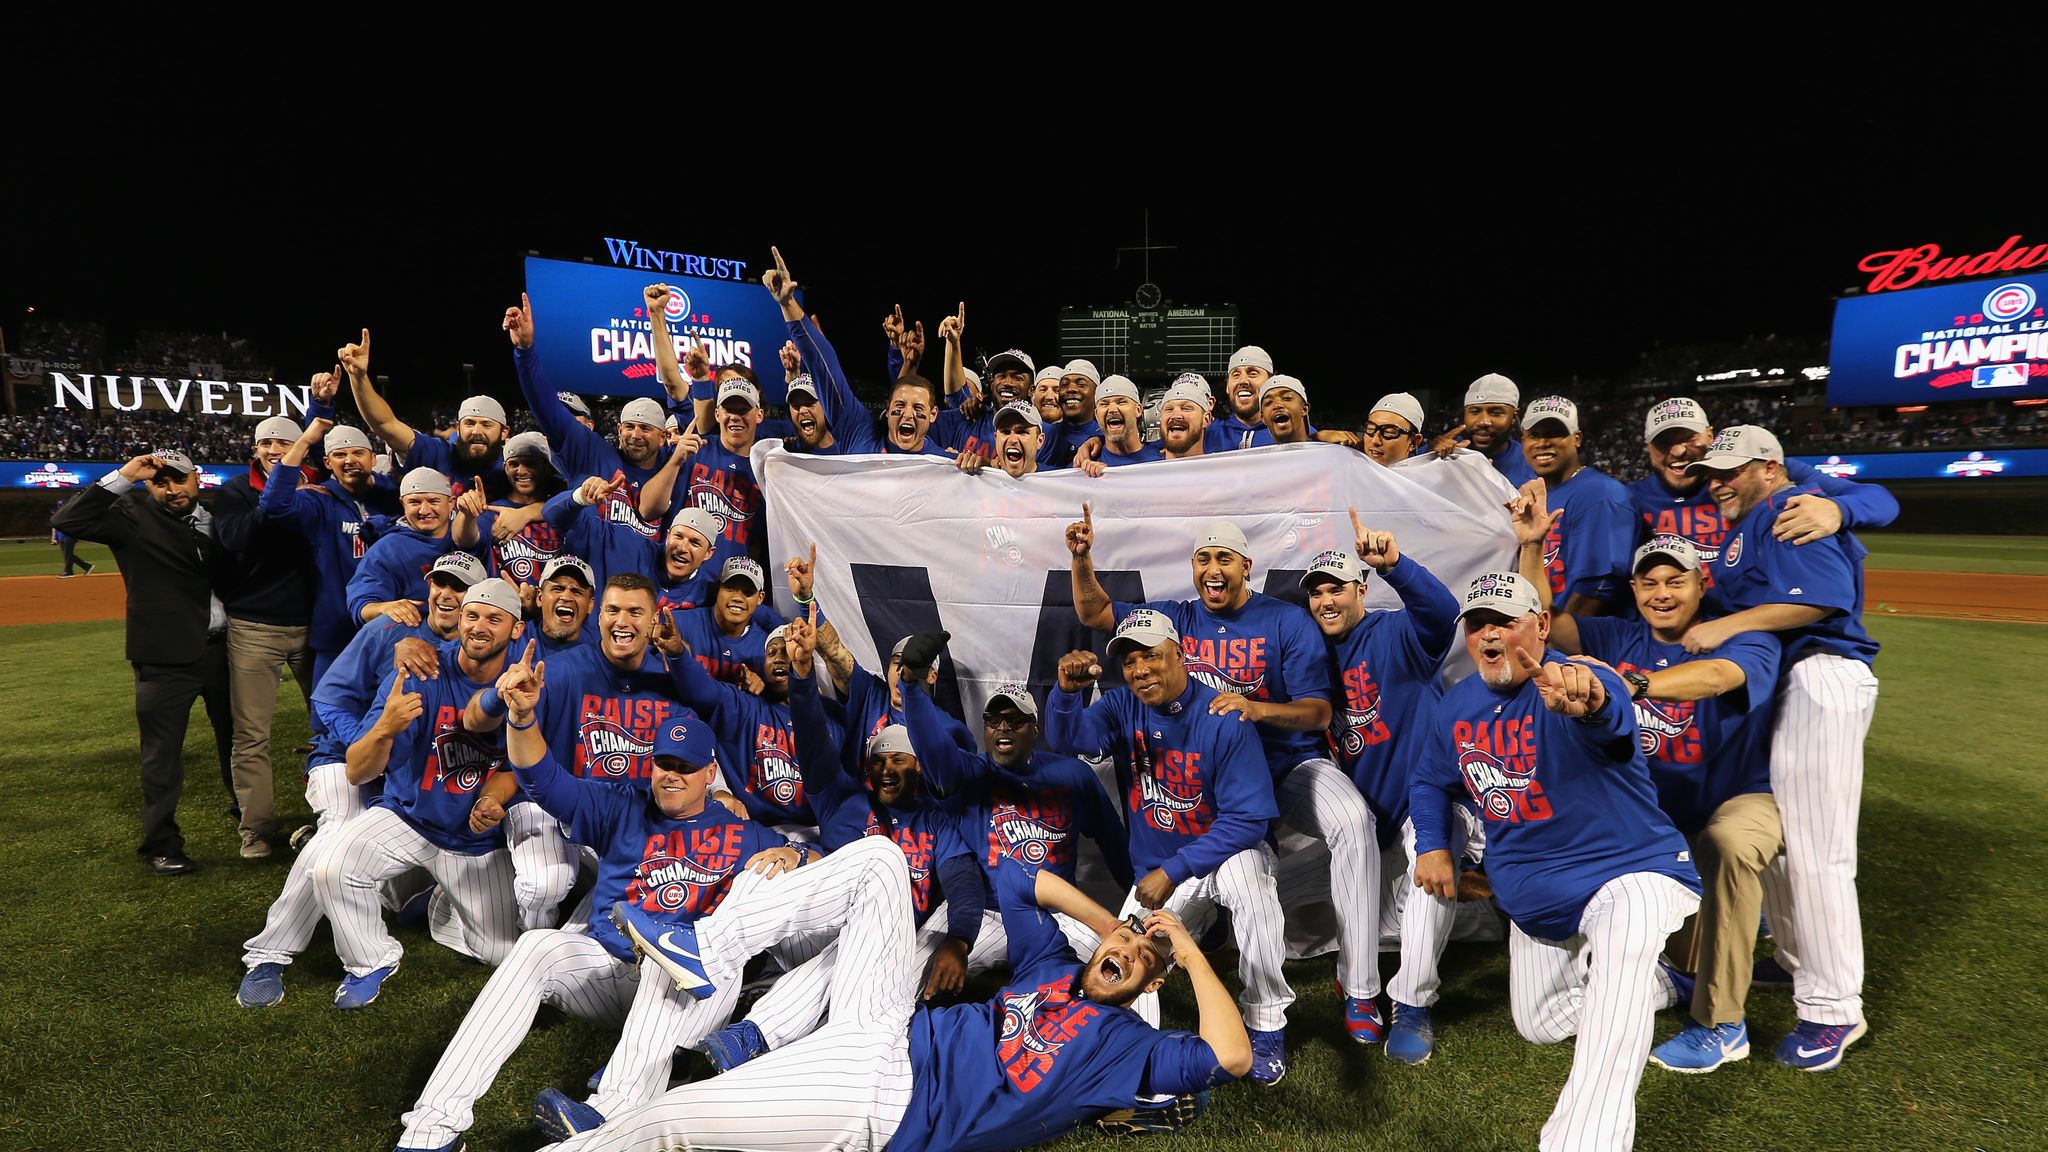 Chicago Cubs, Cleveland Indians to battle in World Series, Baseball News